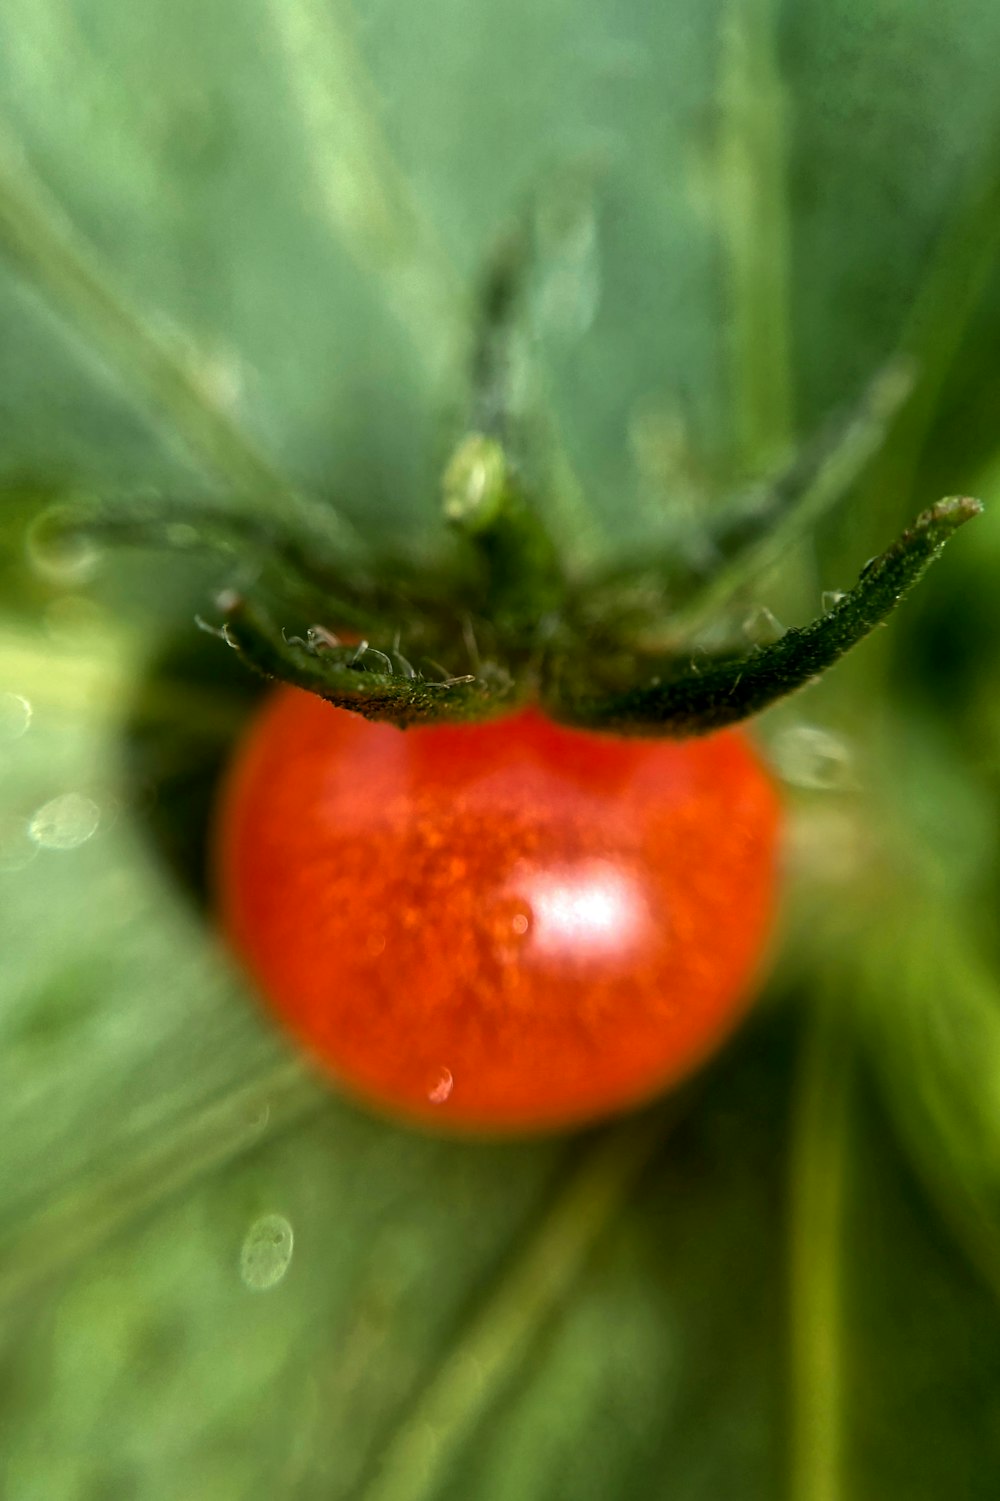 a close up of a tomato on a leaf